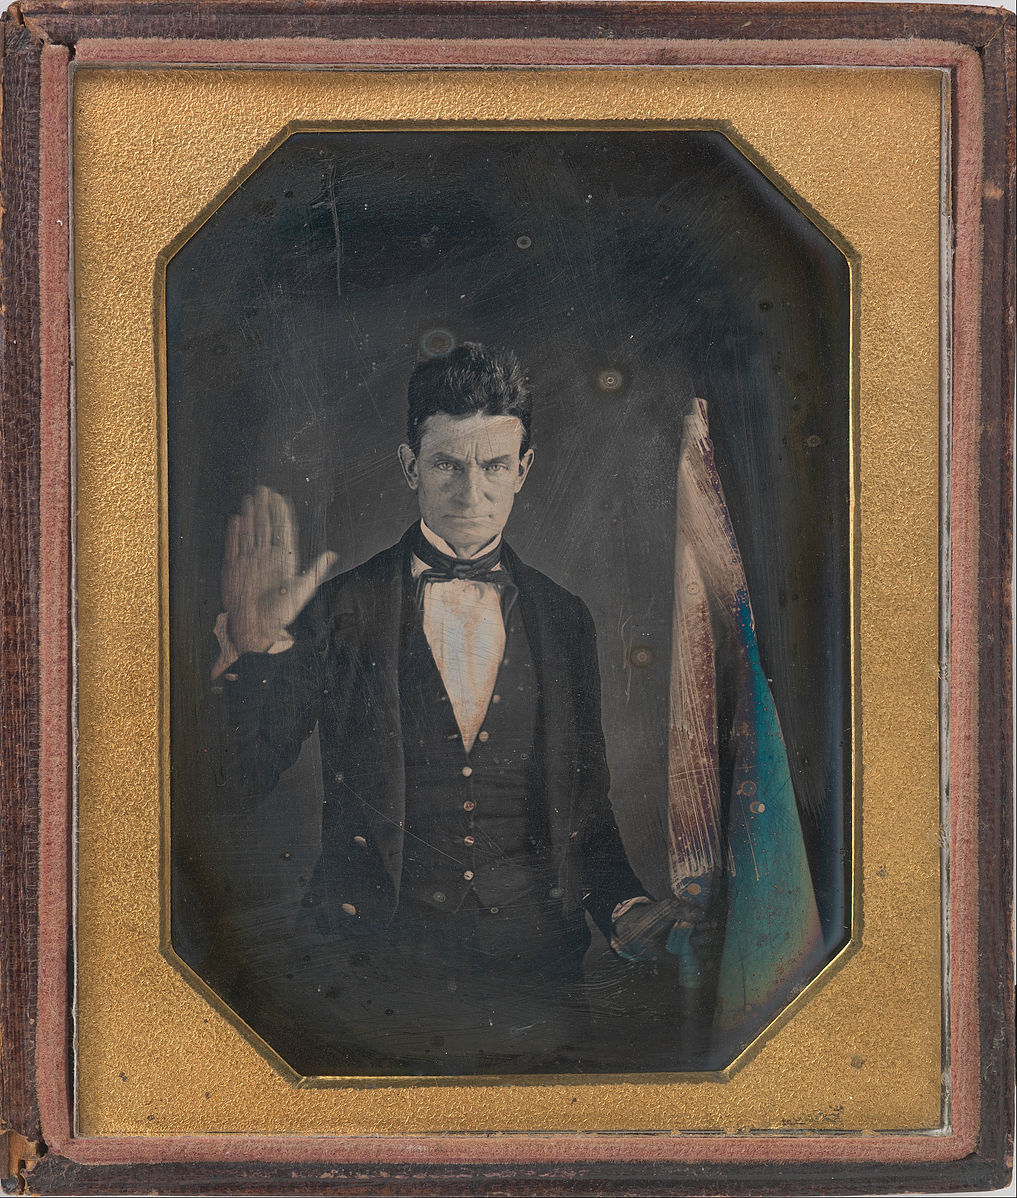 A framed portrait of John Brown wearing a tuxedo style suit. He has his right hand raised and holds a flag in his left hand. The flag has red and greenish blue coloring.